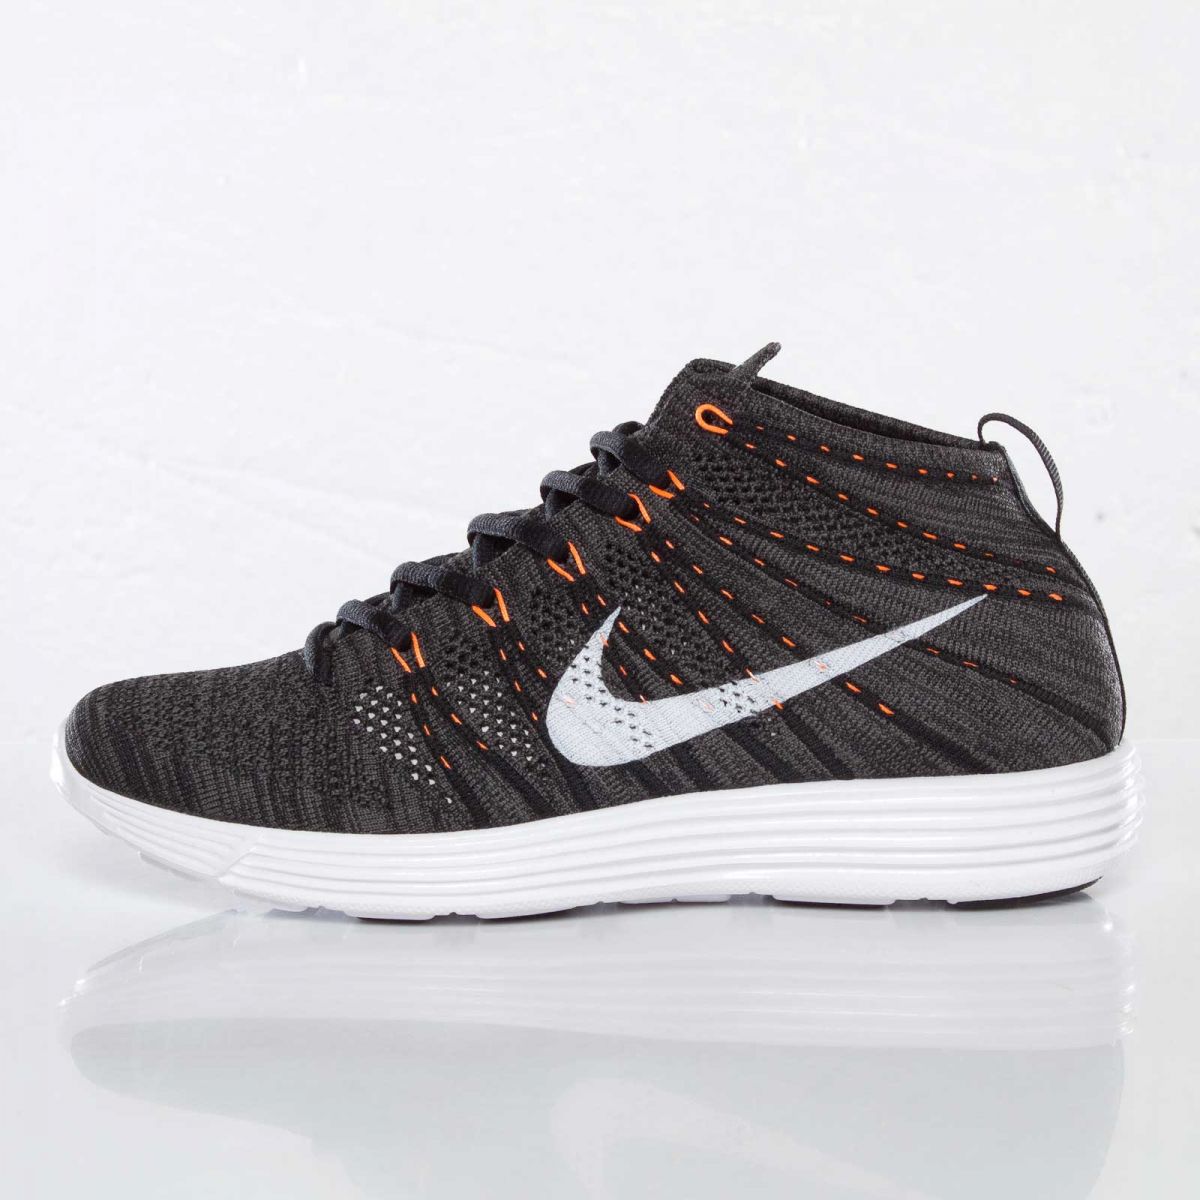 Nike Lunar Flyknit Chukka - Midnight Fog - Detailed Images | Sole Collector